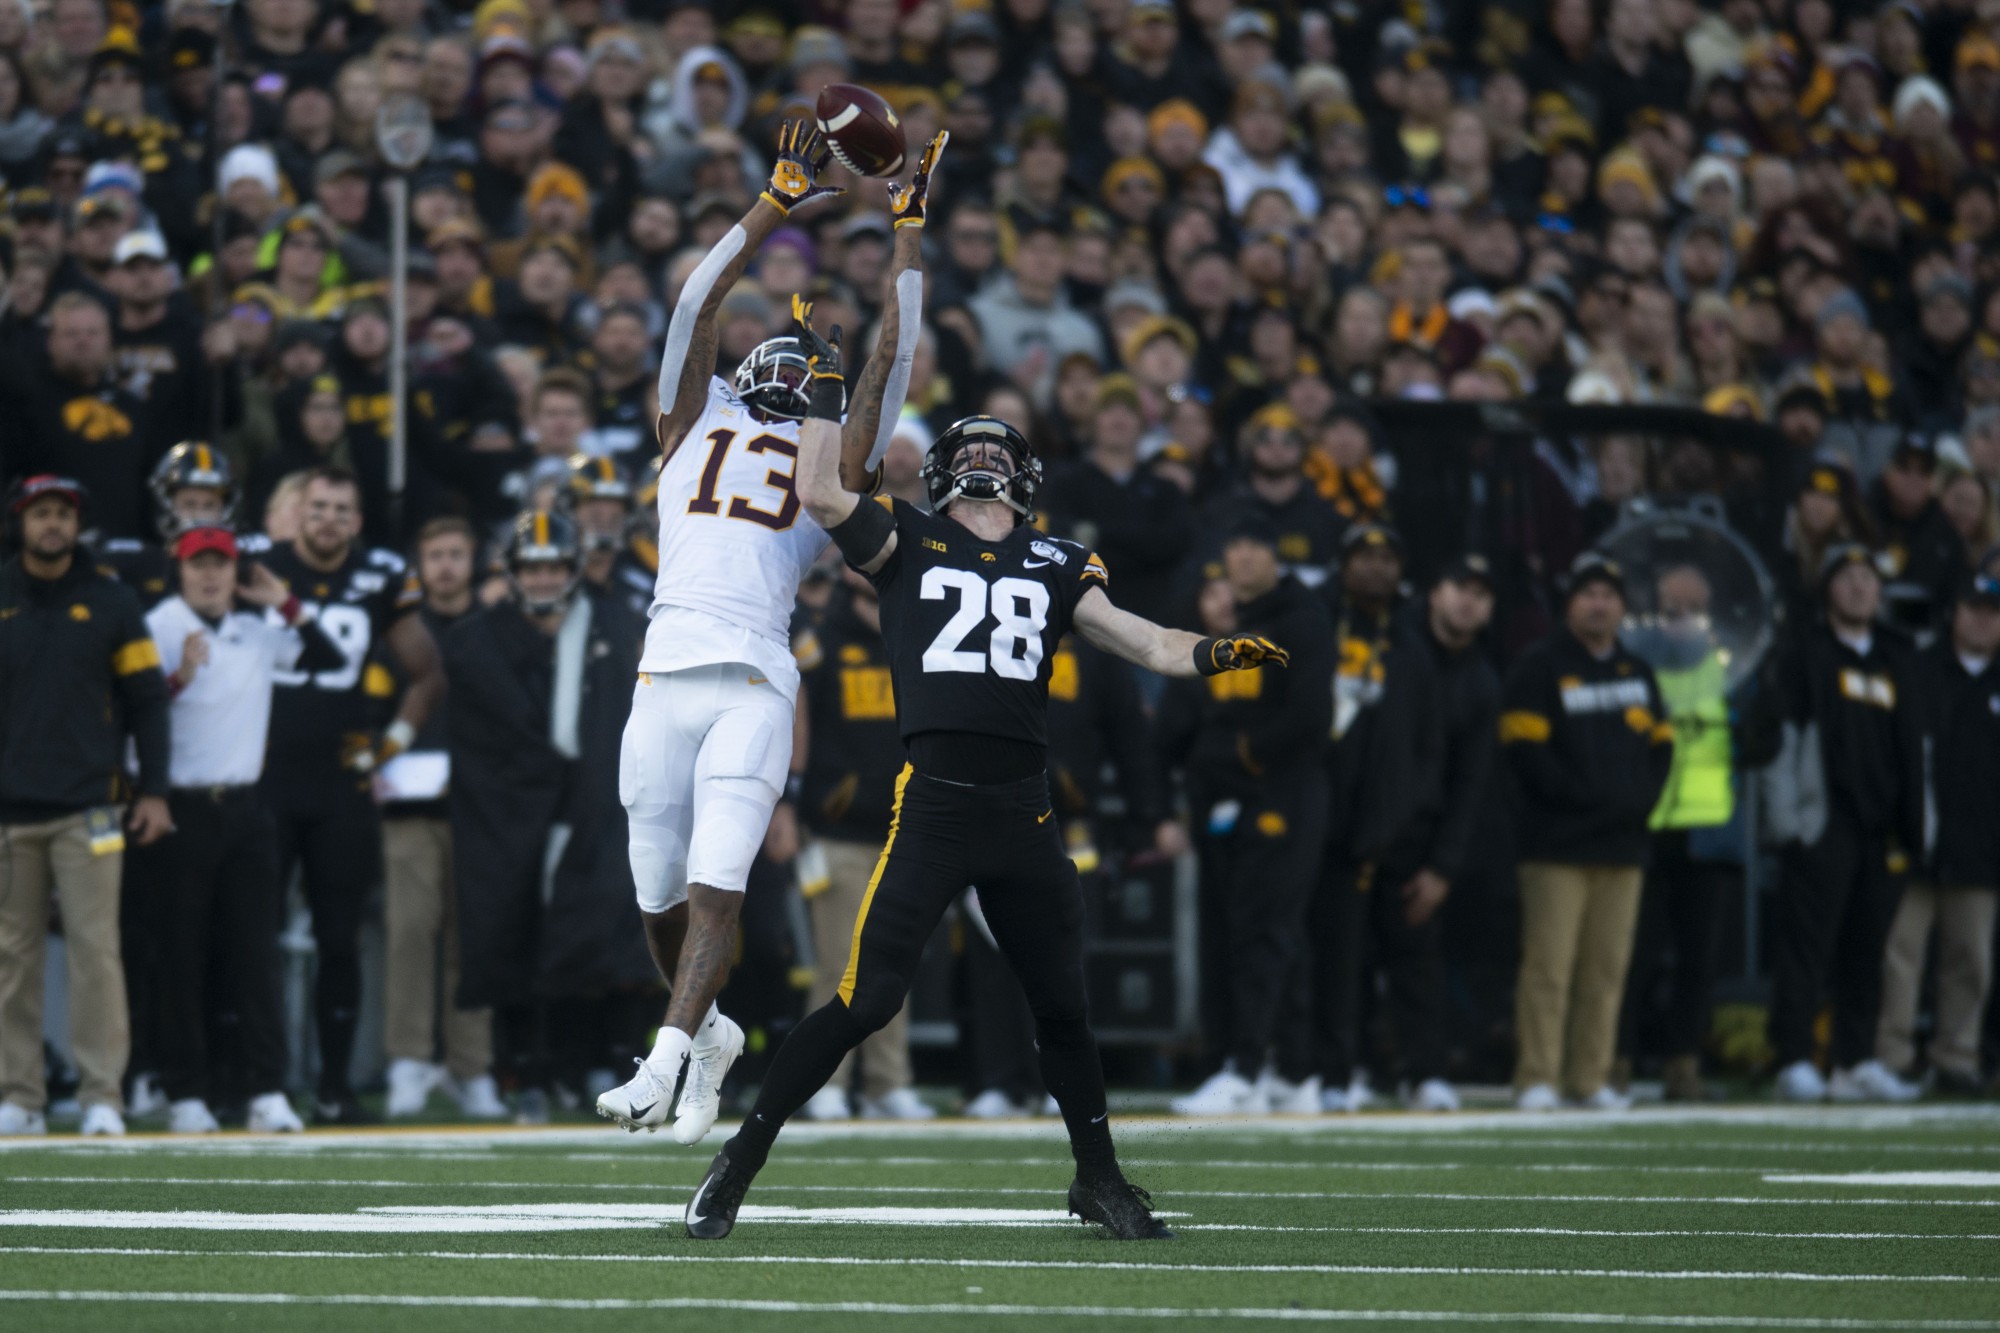 Wide receiver Rashod Bateman looks to catch a pass during the first quarter at Kinnick Stadium on Saturday, Nov. 16. Iowa defeated the Gophers 23-19 ending their winning streak and bringing their record to 9-1. 